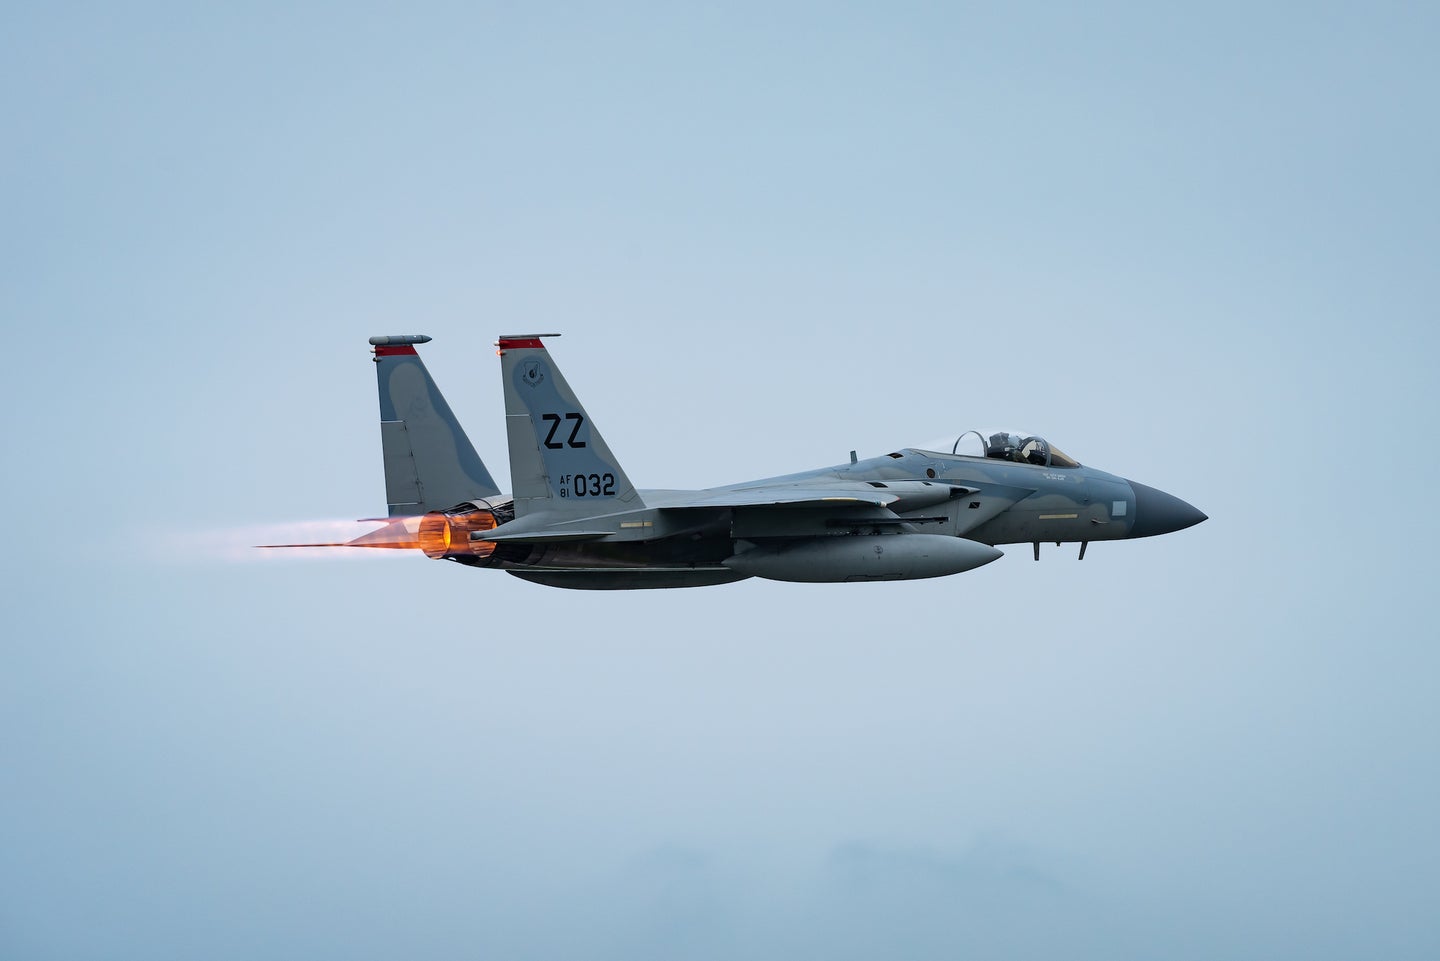 An F-15C Eagle fighter jet takes off.